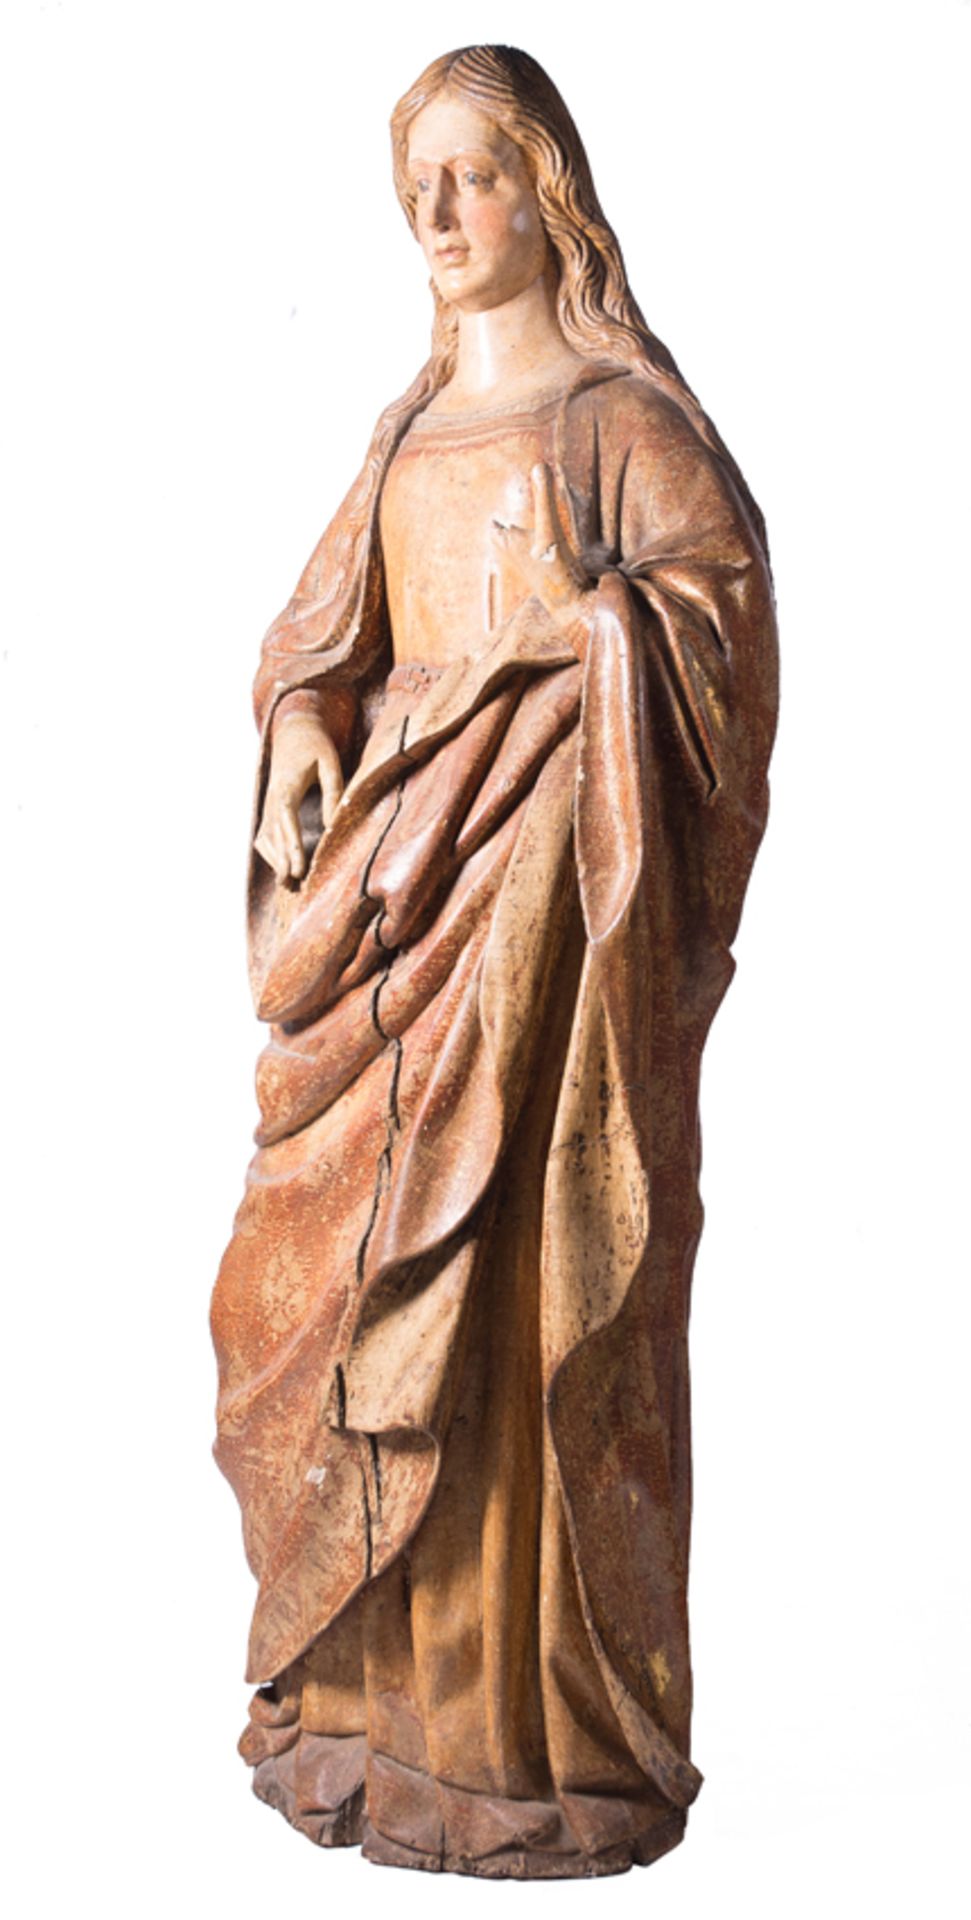 "Mary Magdalene". Carved and polychromed wooden sculpture. Hispanic-Flemish School. 15th century. - Image 3 of 9